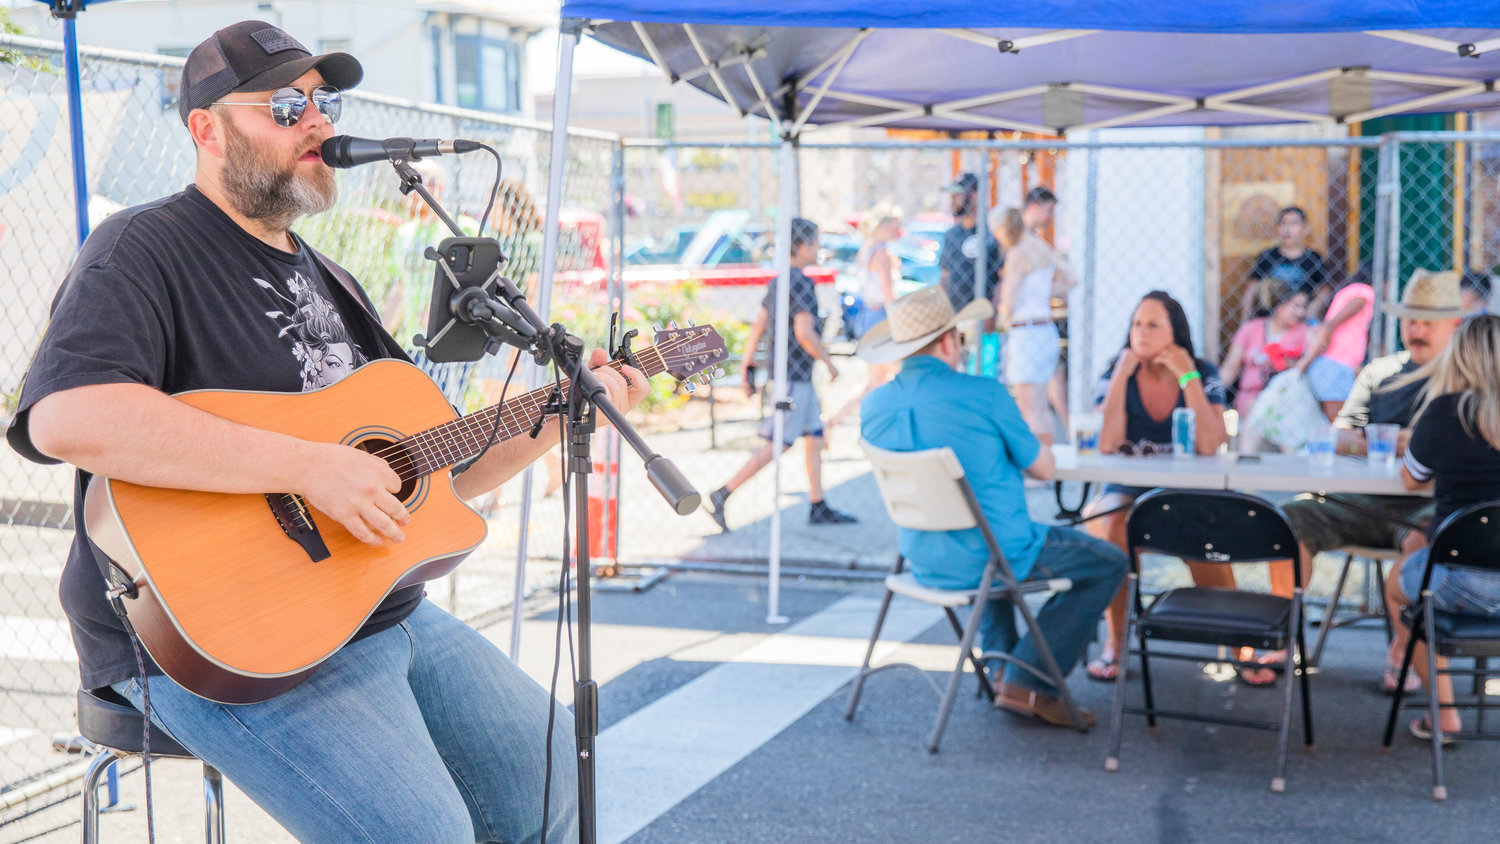 Jeremiah sings and plays guitar as visitors mingle downtown during Chehalis Fest Saturday afternoon.